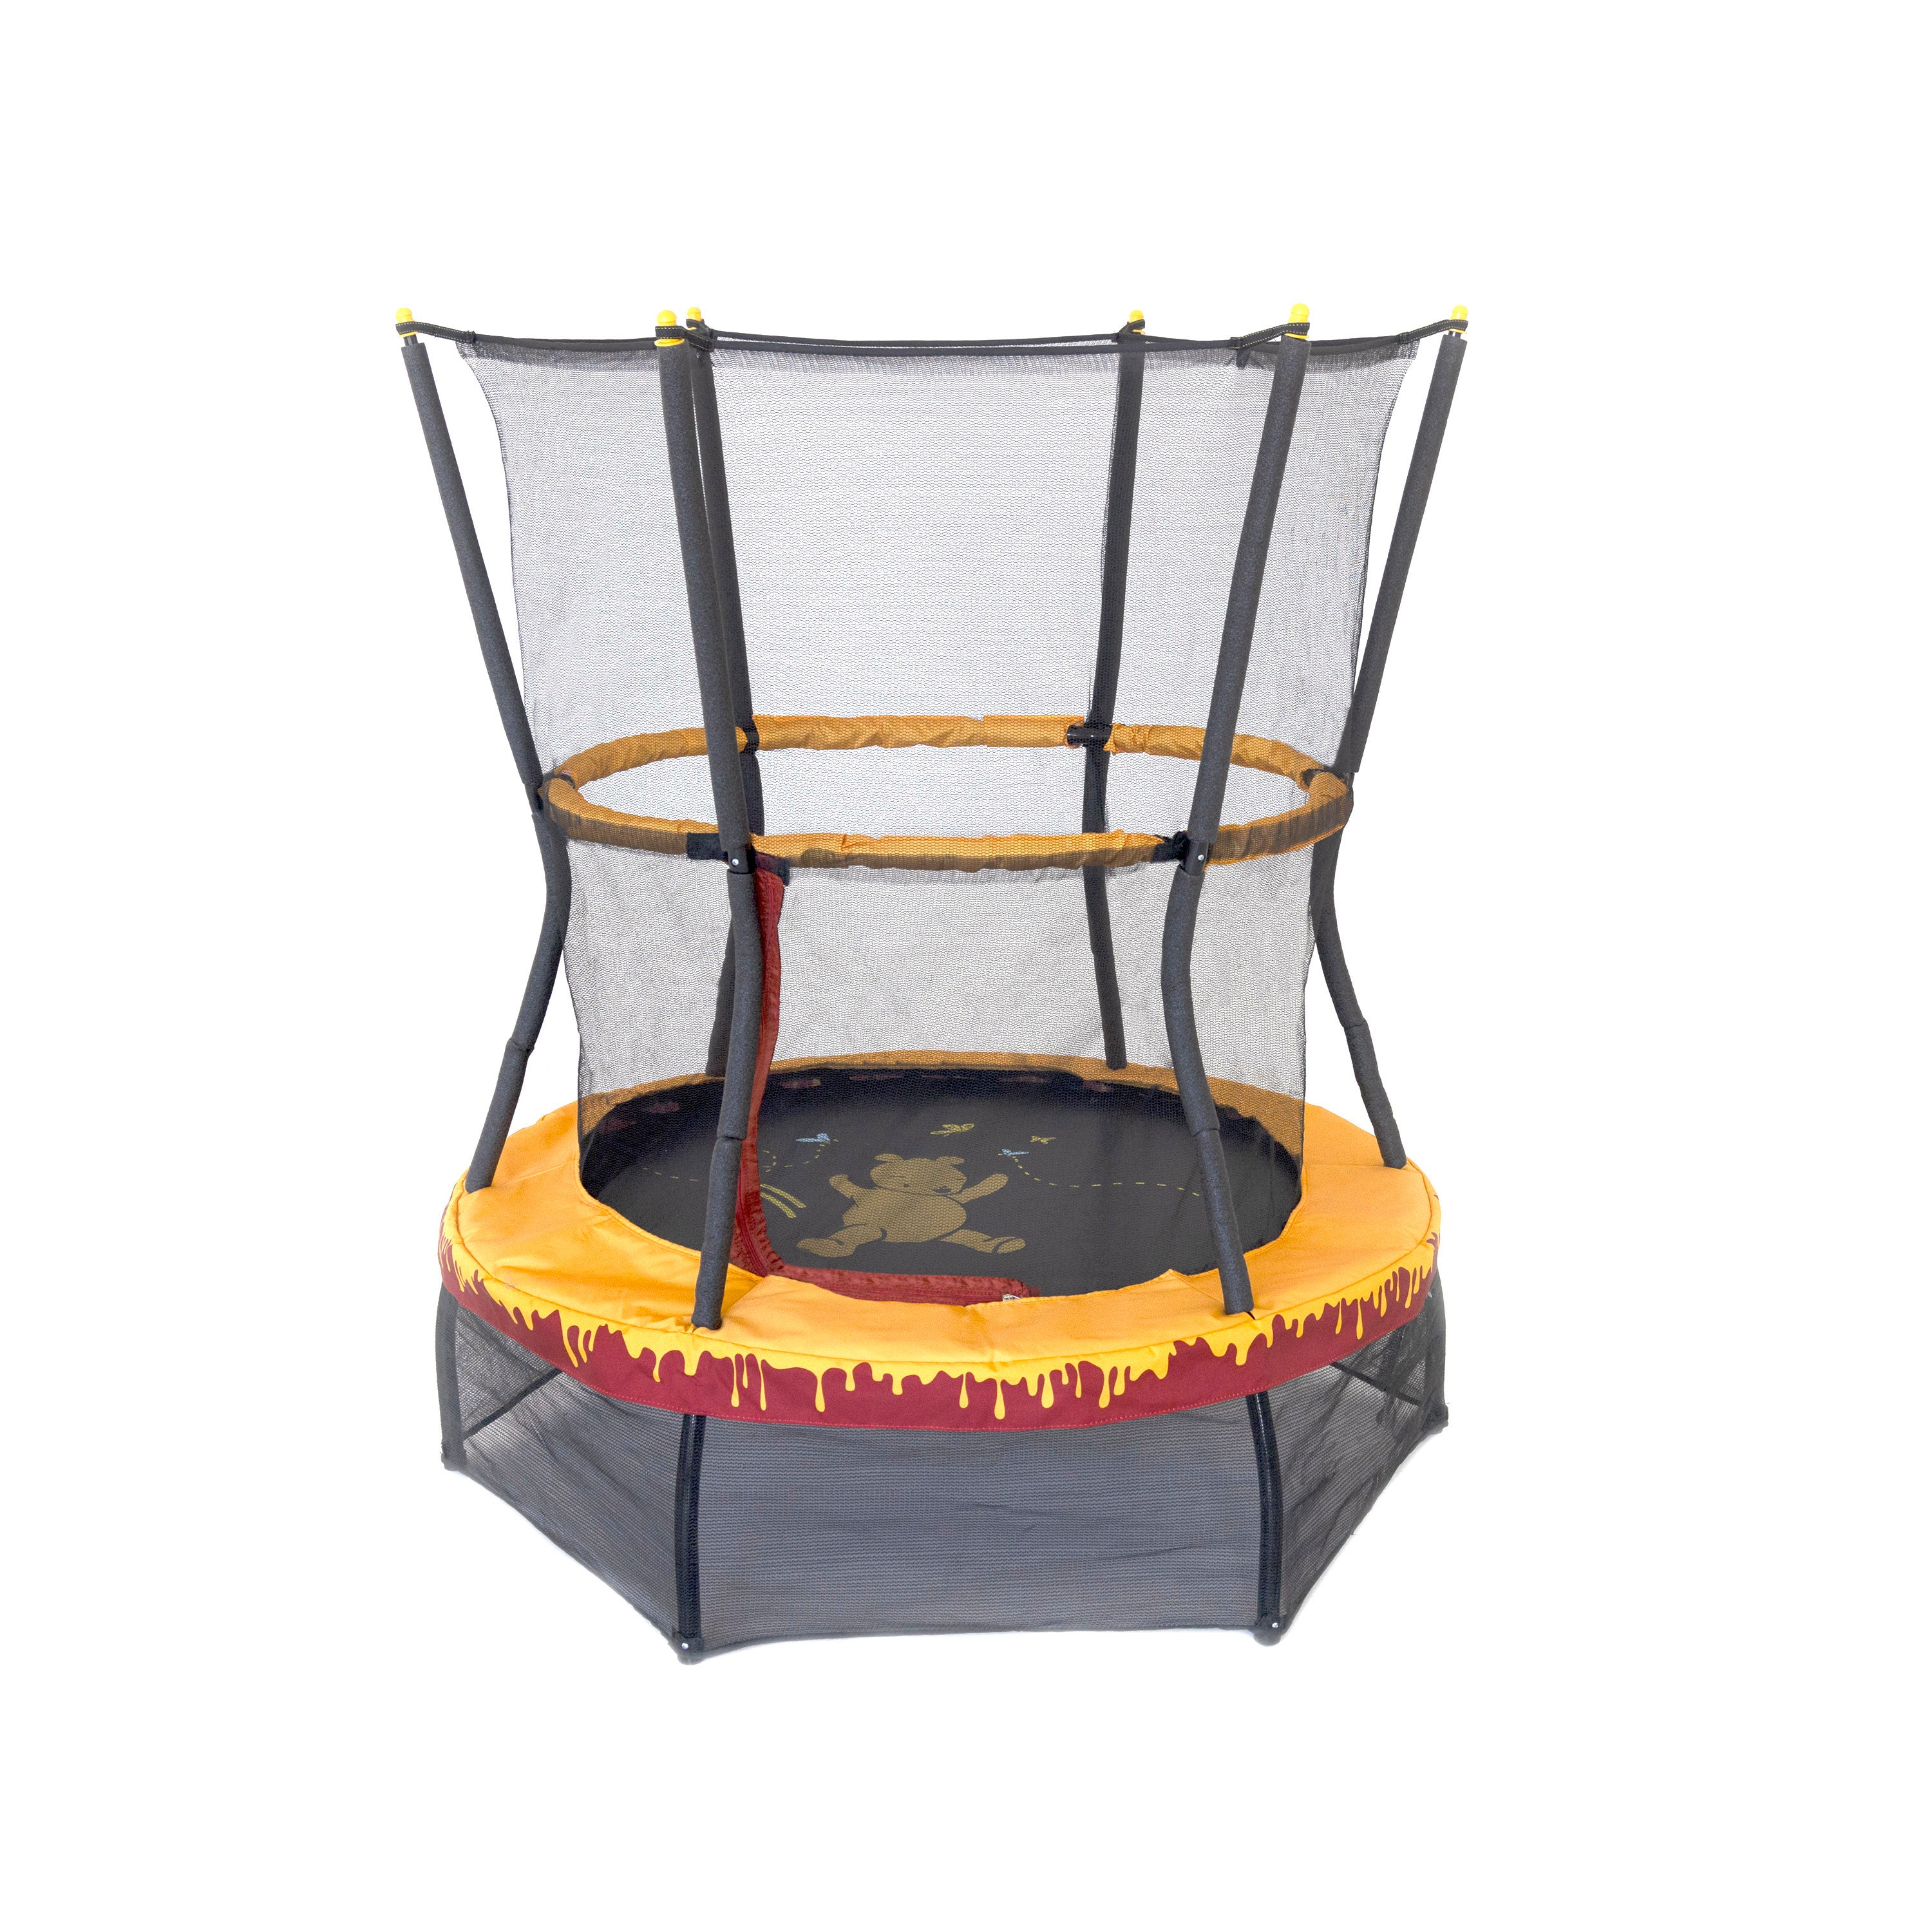 The 48” Winnie the Pooh trampoline has a yellow and red frame pad design, a yellow handlebar and both a upper and lower enclosure net.  